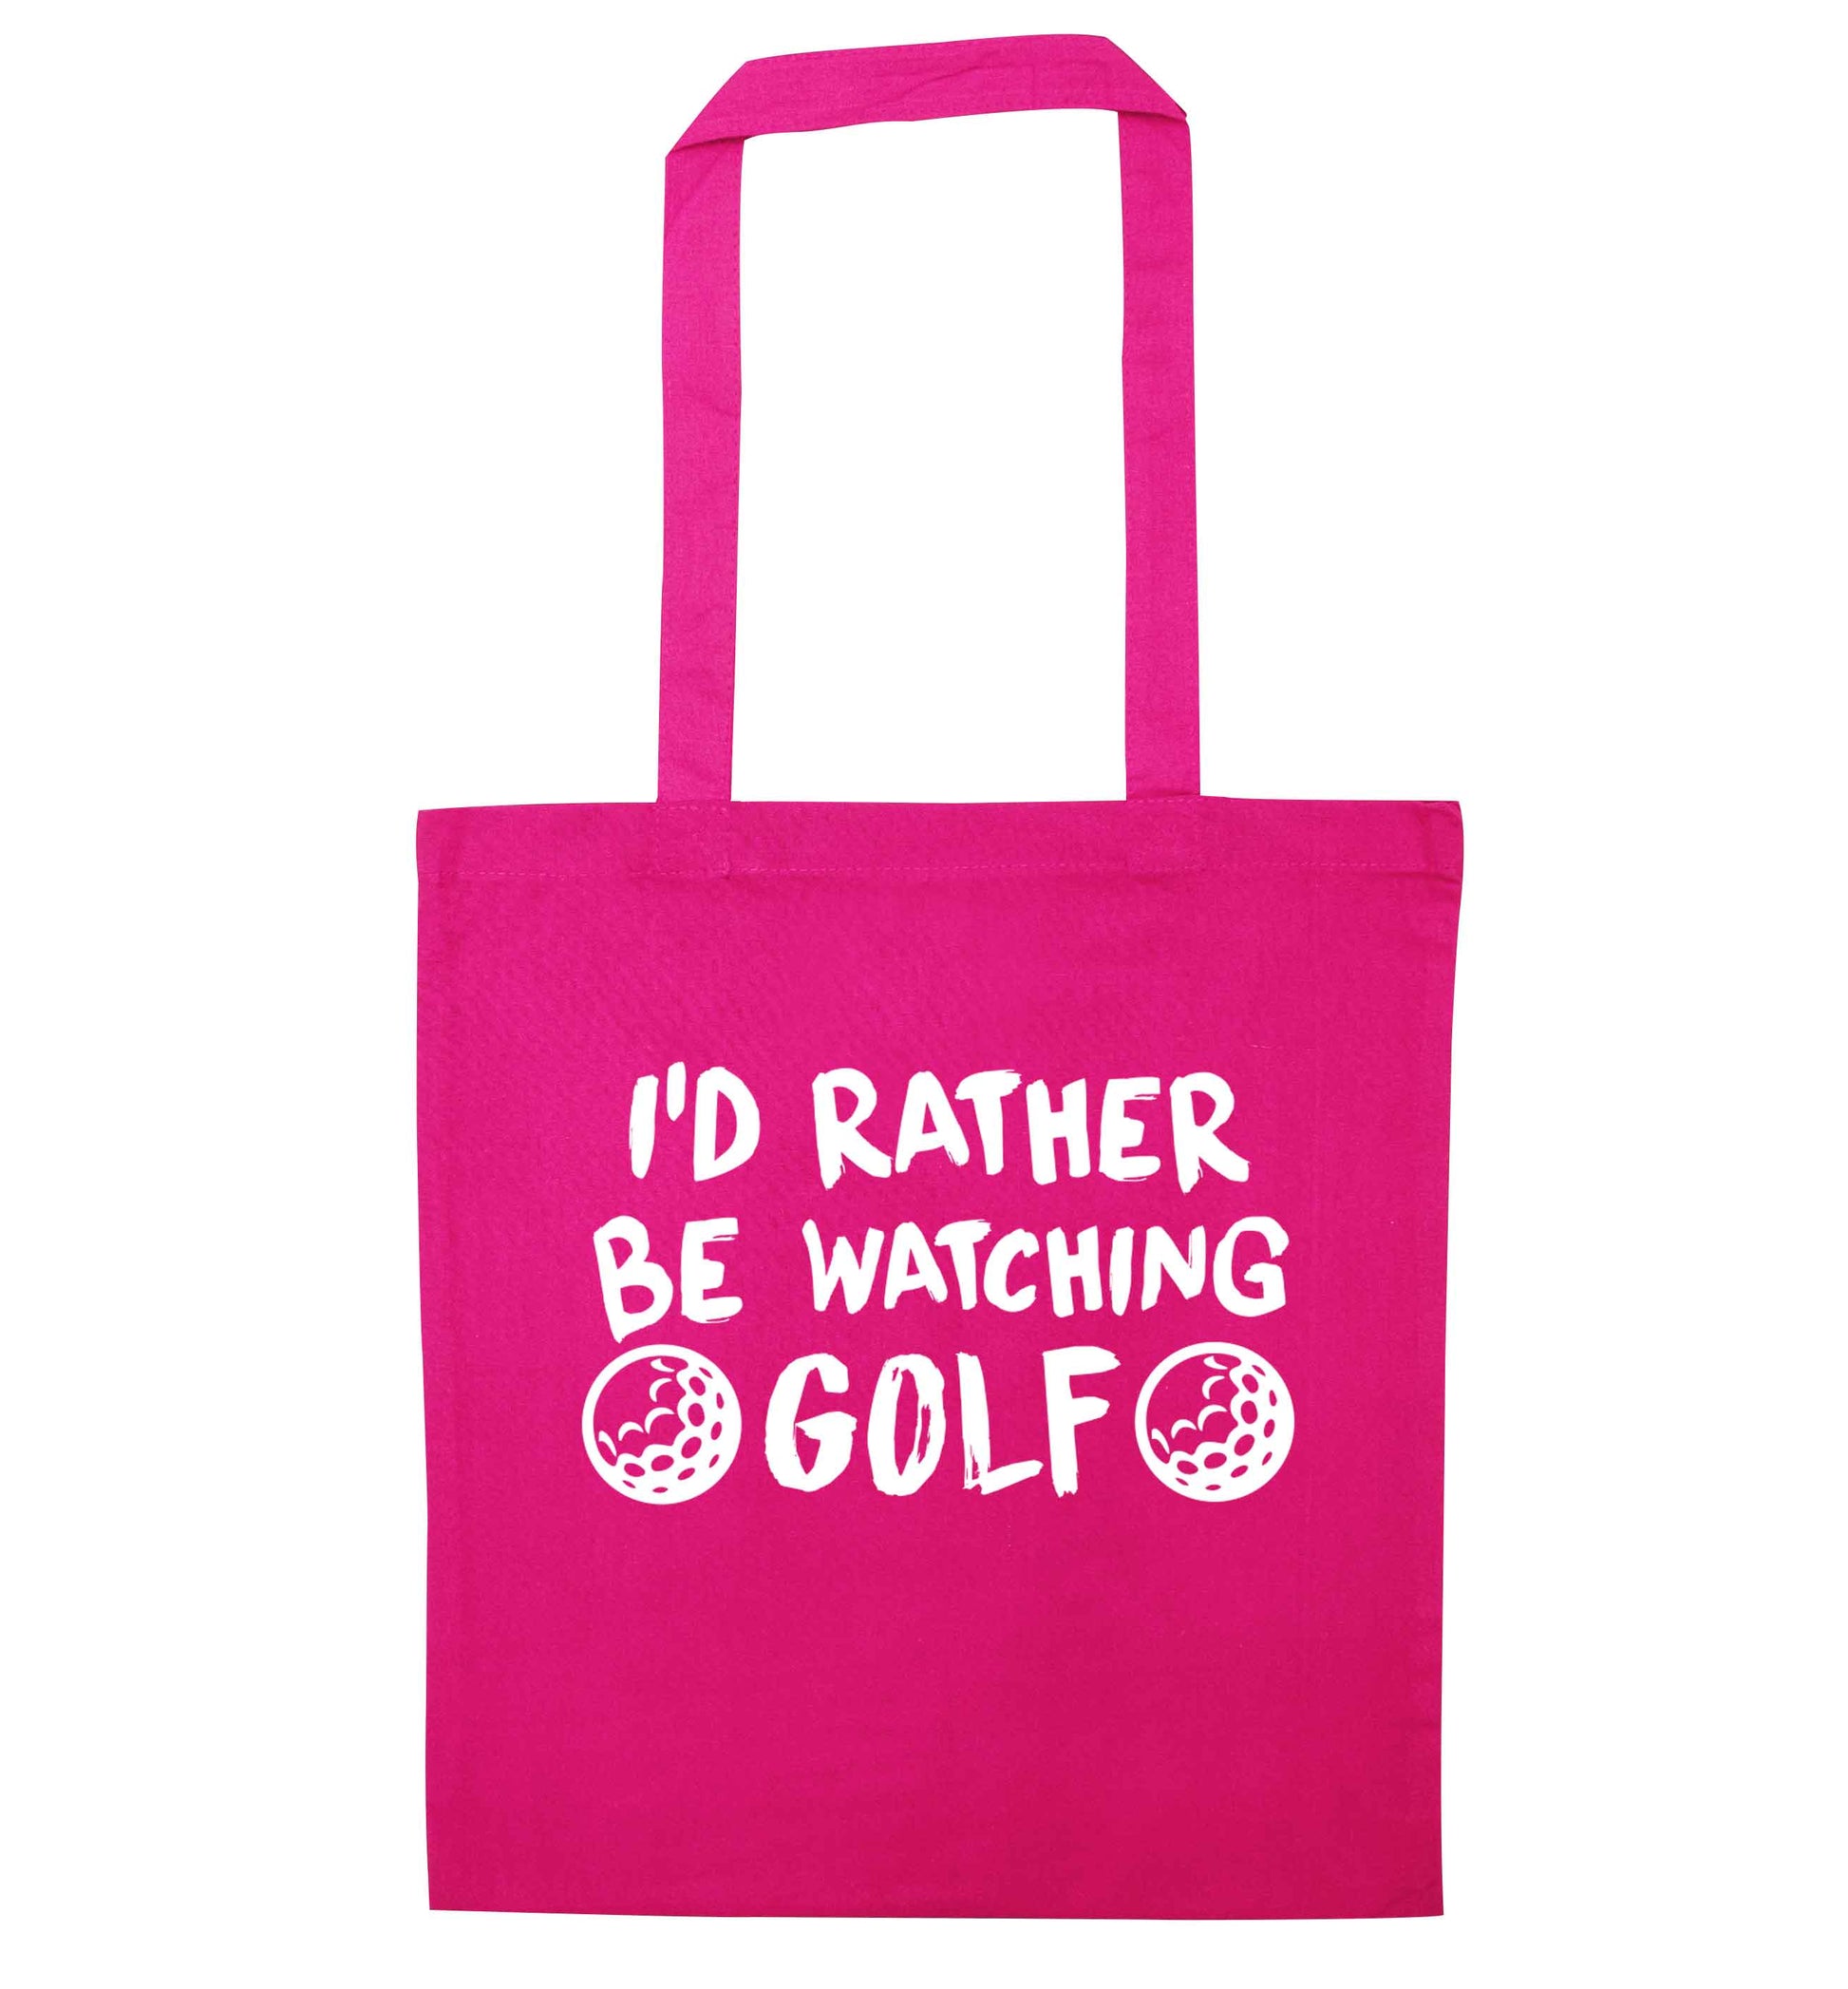 I'd rather be watching golf pink tote bag